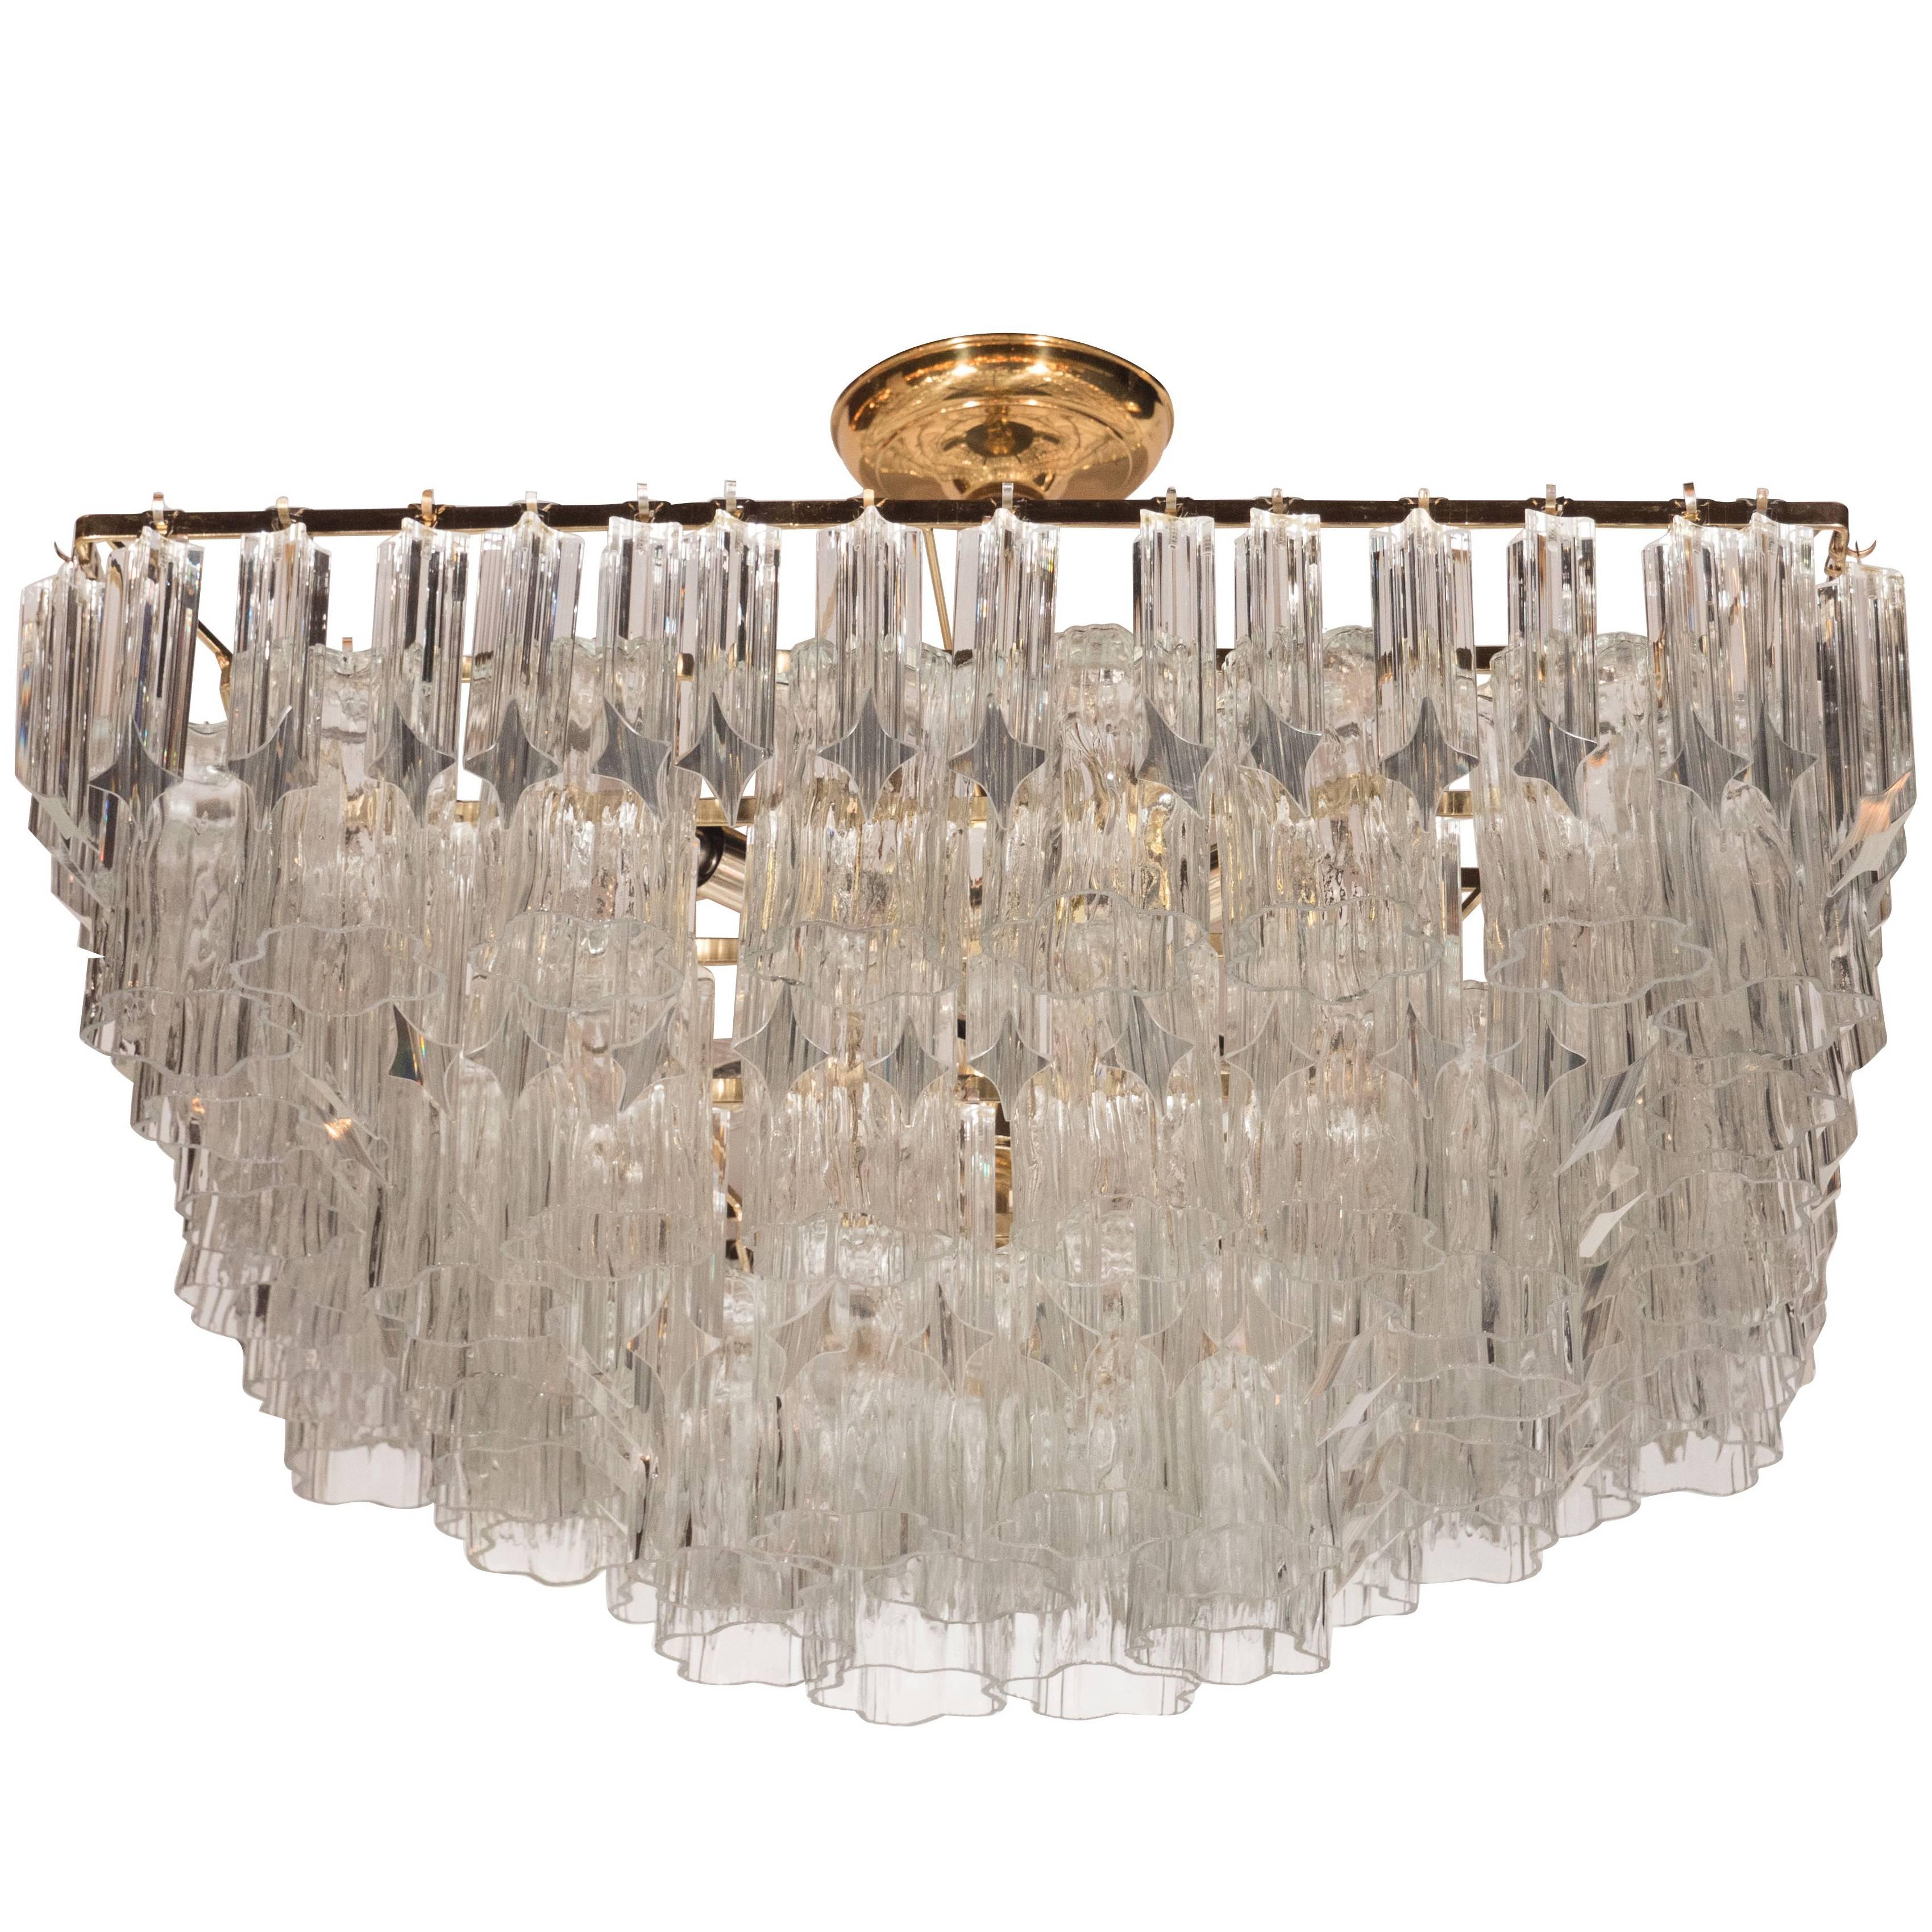 Mid-Century Modernist Tronchi and Camer Six-Tier Chandelier with Brass Fittings